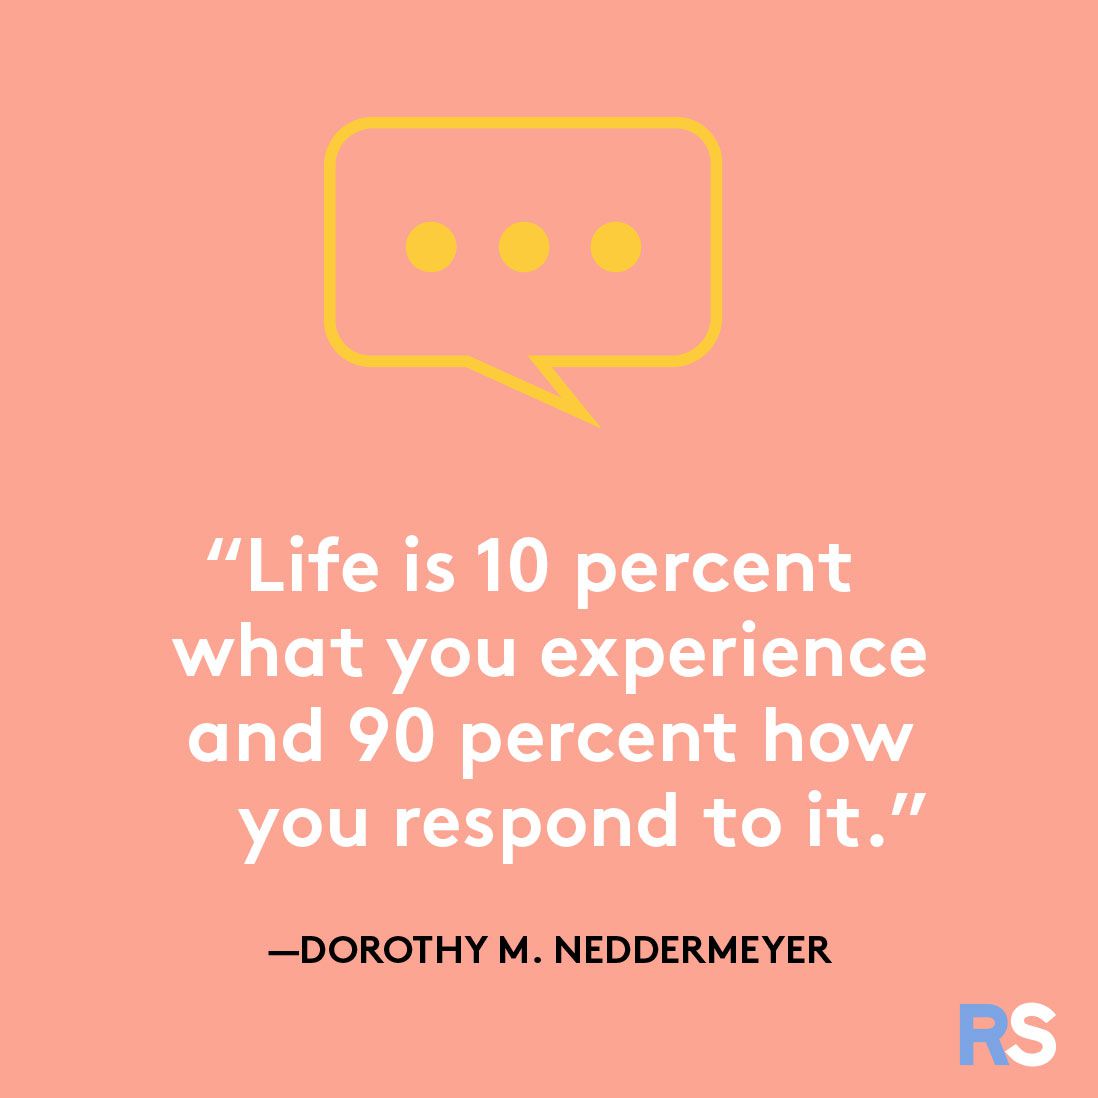 Life is 10 percent what you experience and 90 percent how you respond to it.